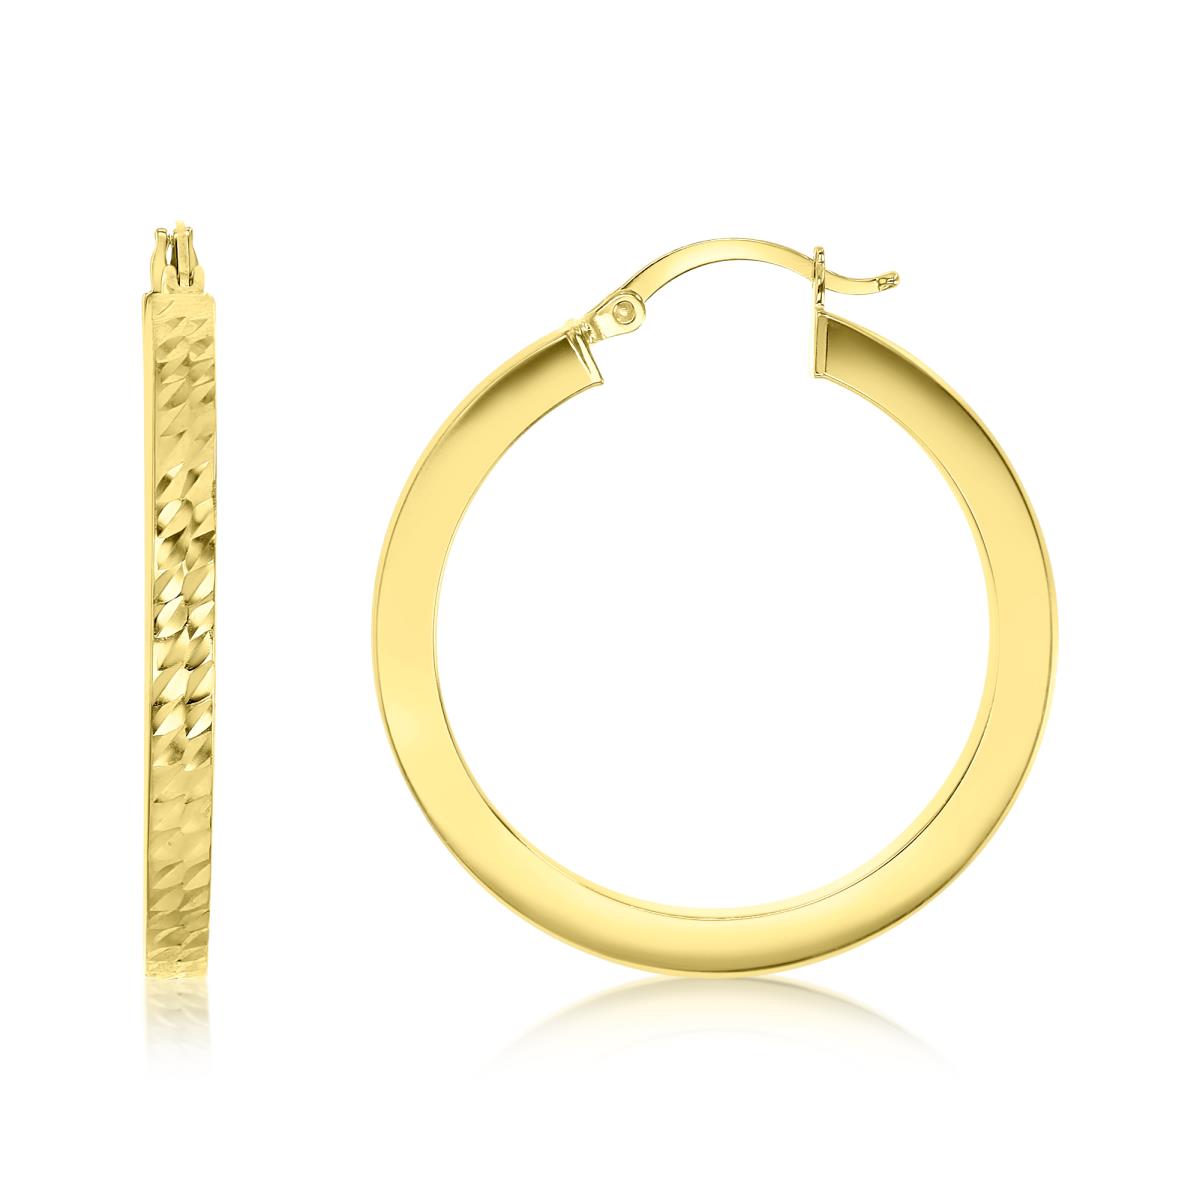 14K Yellow Gold 3x30MM Hand Crafted DC Square Tube Hoop Earrings